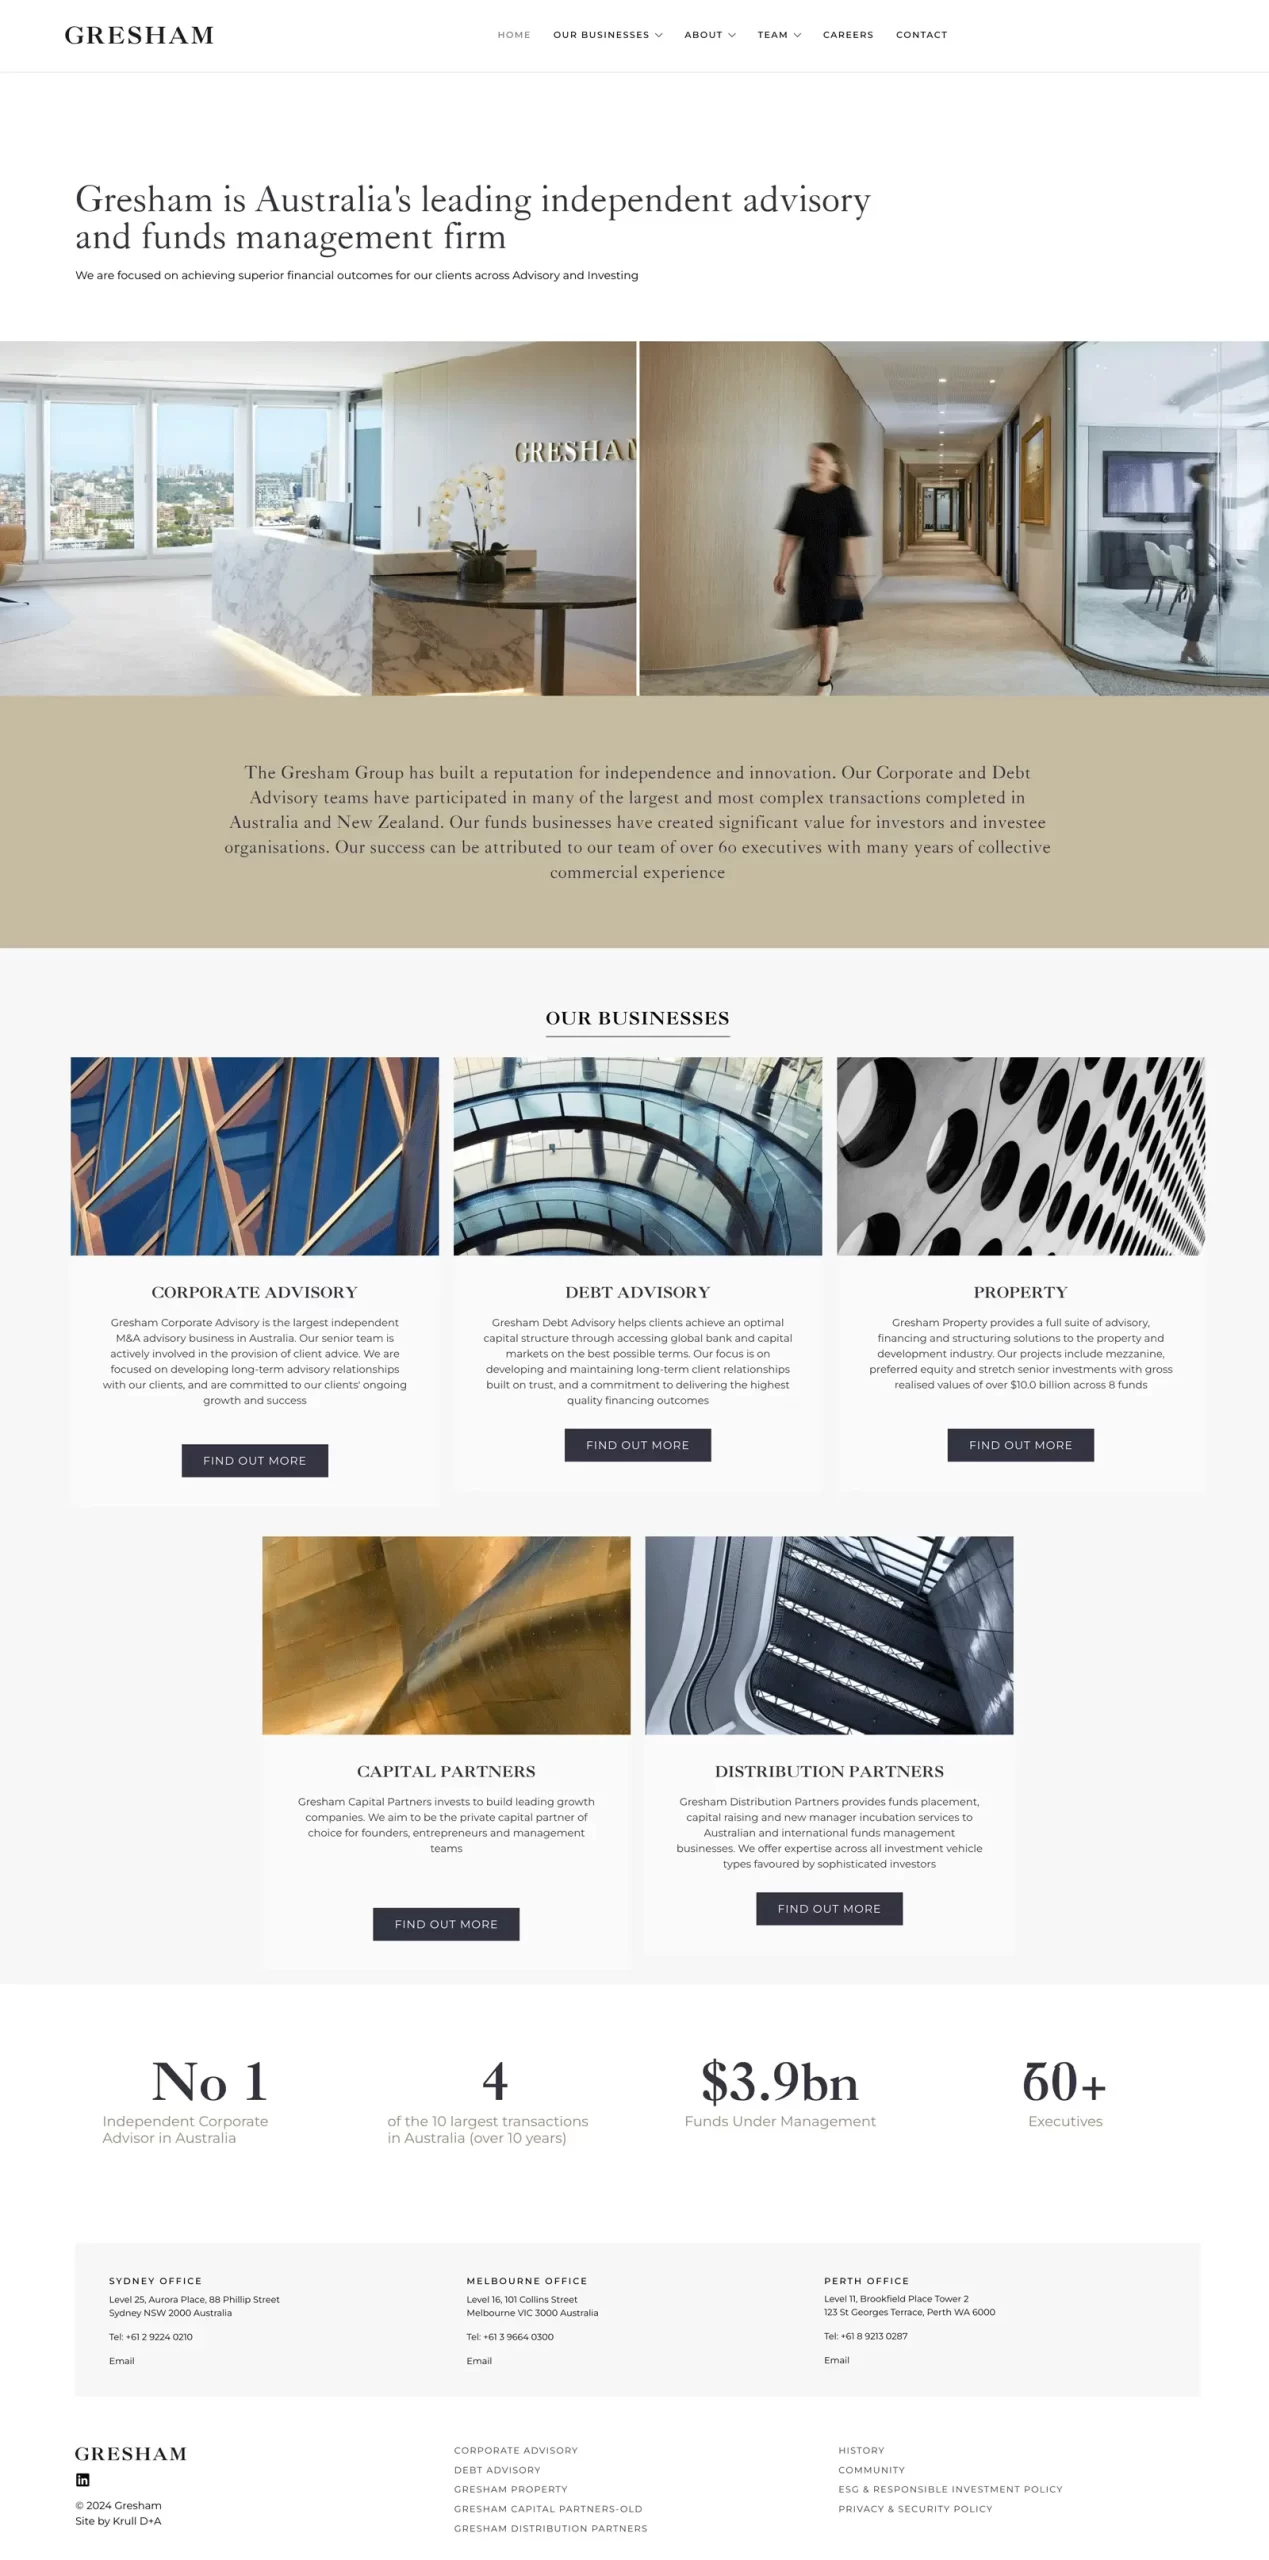 Homepage of Gresham advisory and funds management firm, featuring sections on corporate, debt, and property advisory, capital partnerships, firm statistics, and contact information.